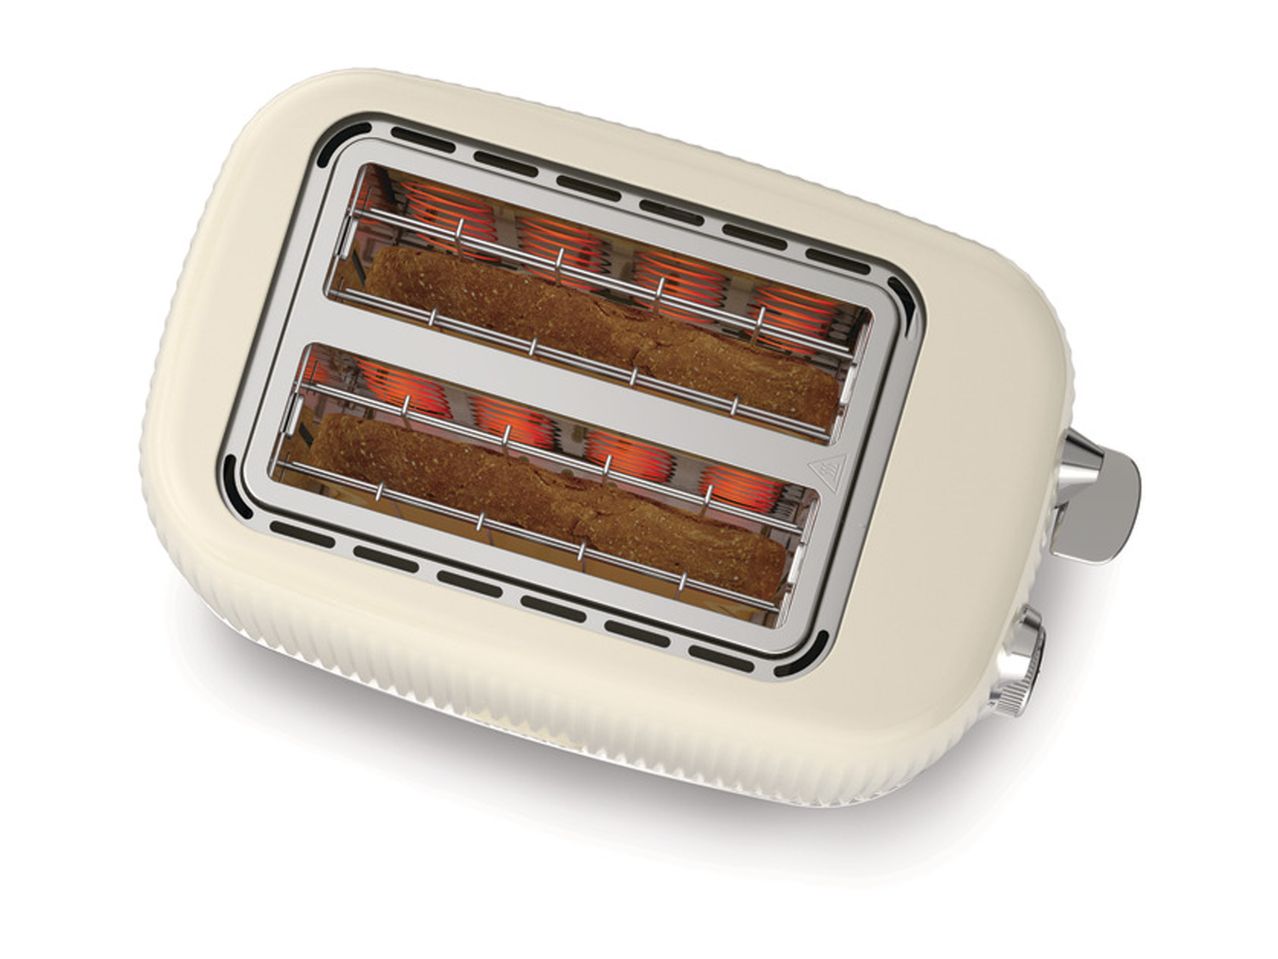 Go to full screen view: Breville Bold 2 Slice Toaster - Cream - Image 3